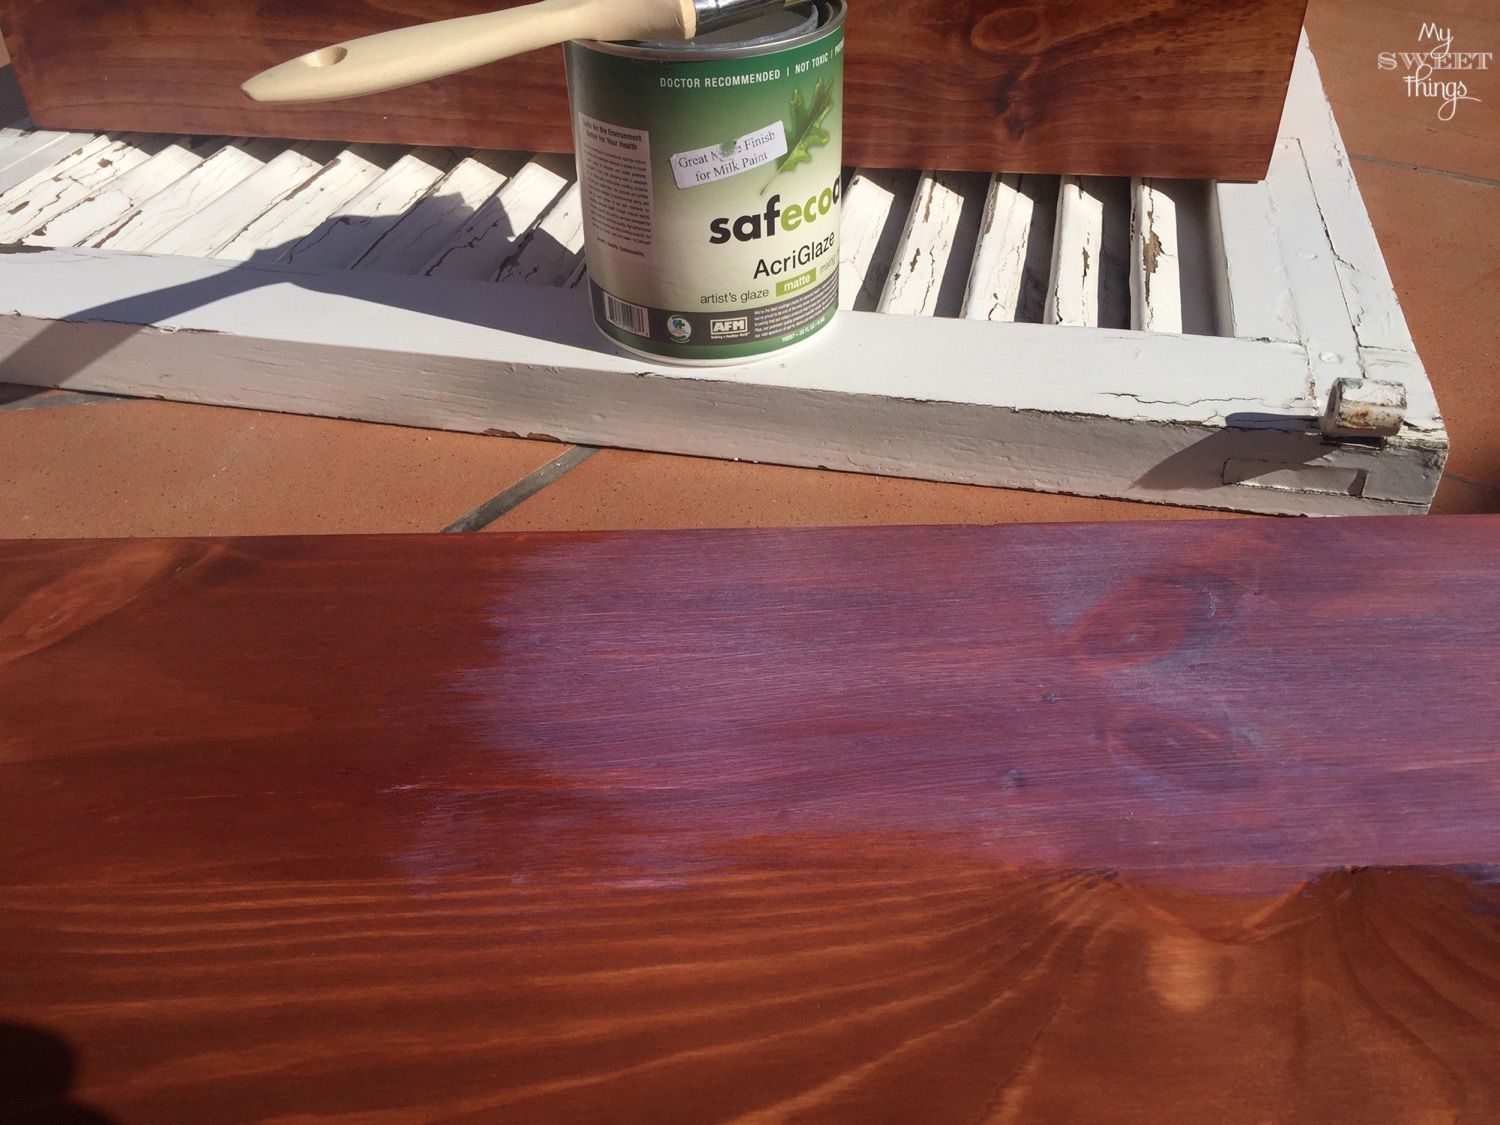 How To Upcycle Old Furniture · Staining the top · Via www.sweethings.net